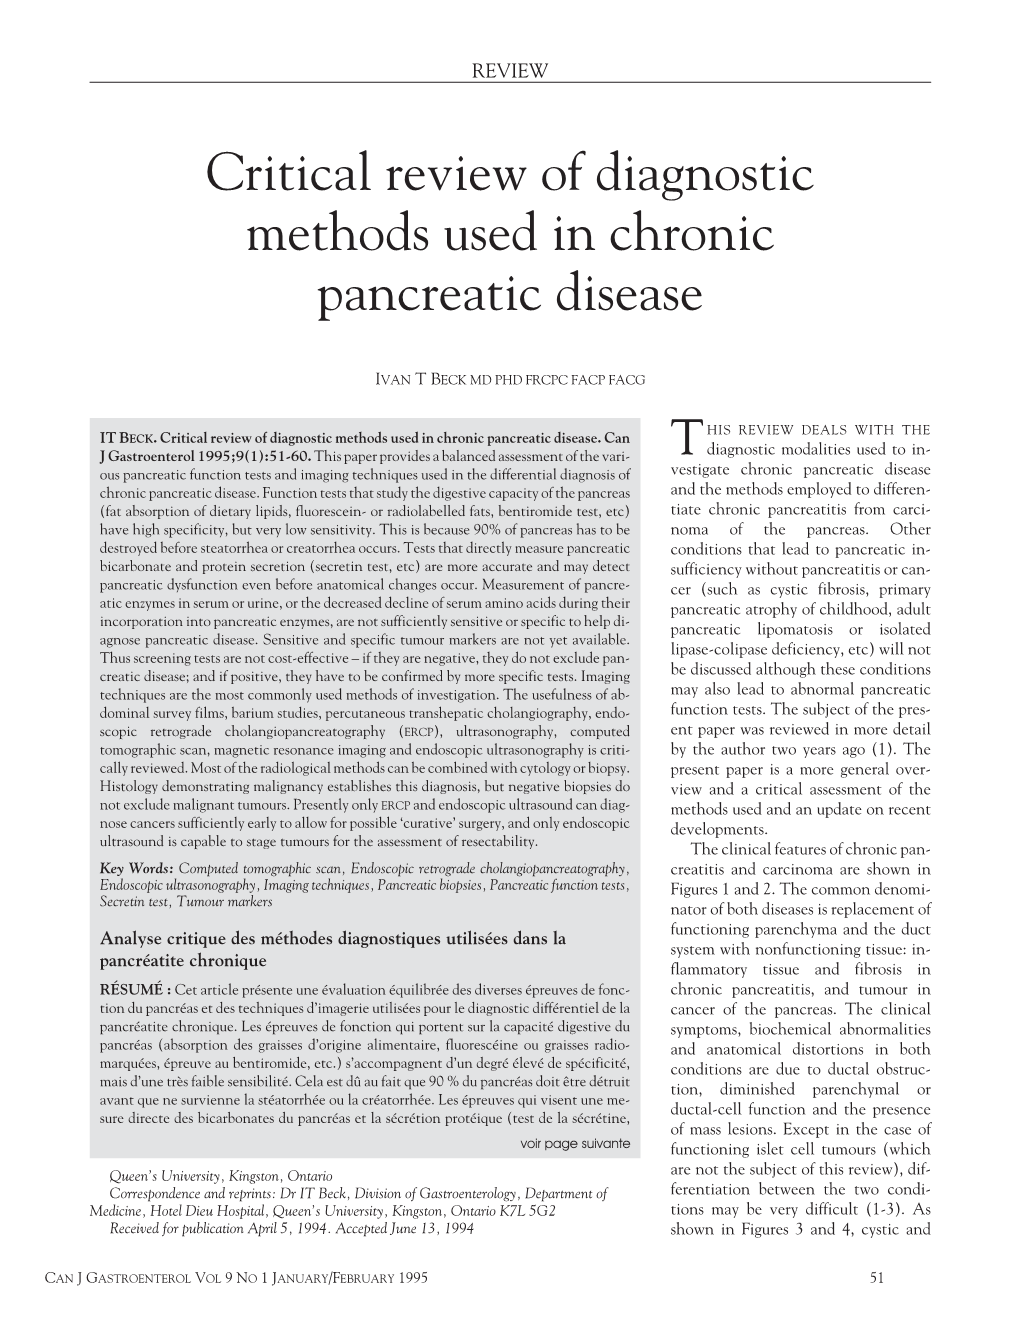 Critical Review of Diagnostic Methods Used in Chronic Pancreatic Disease